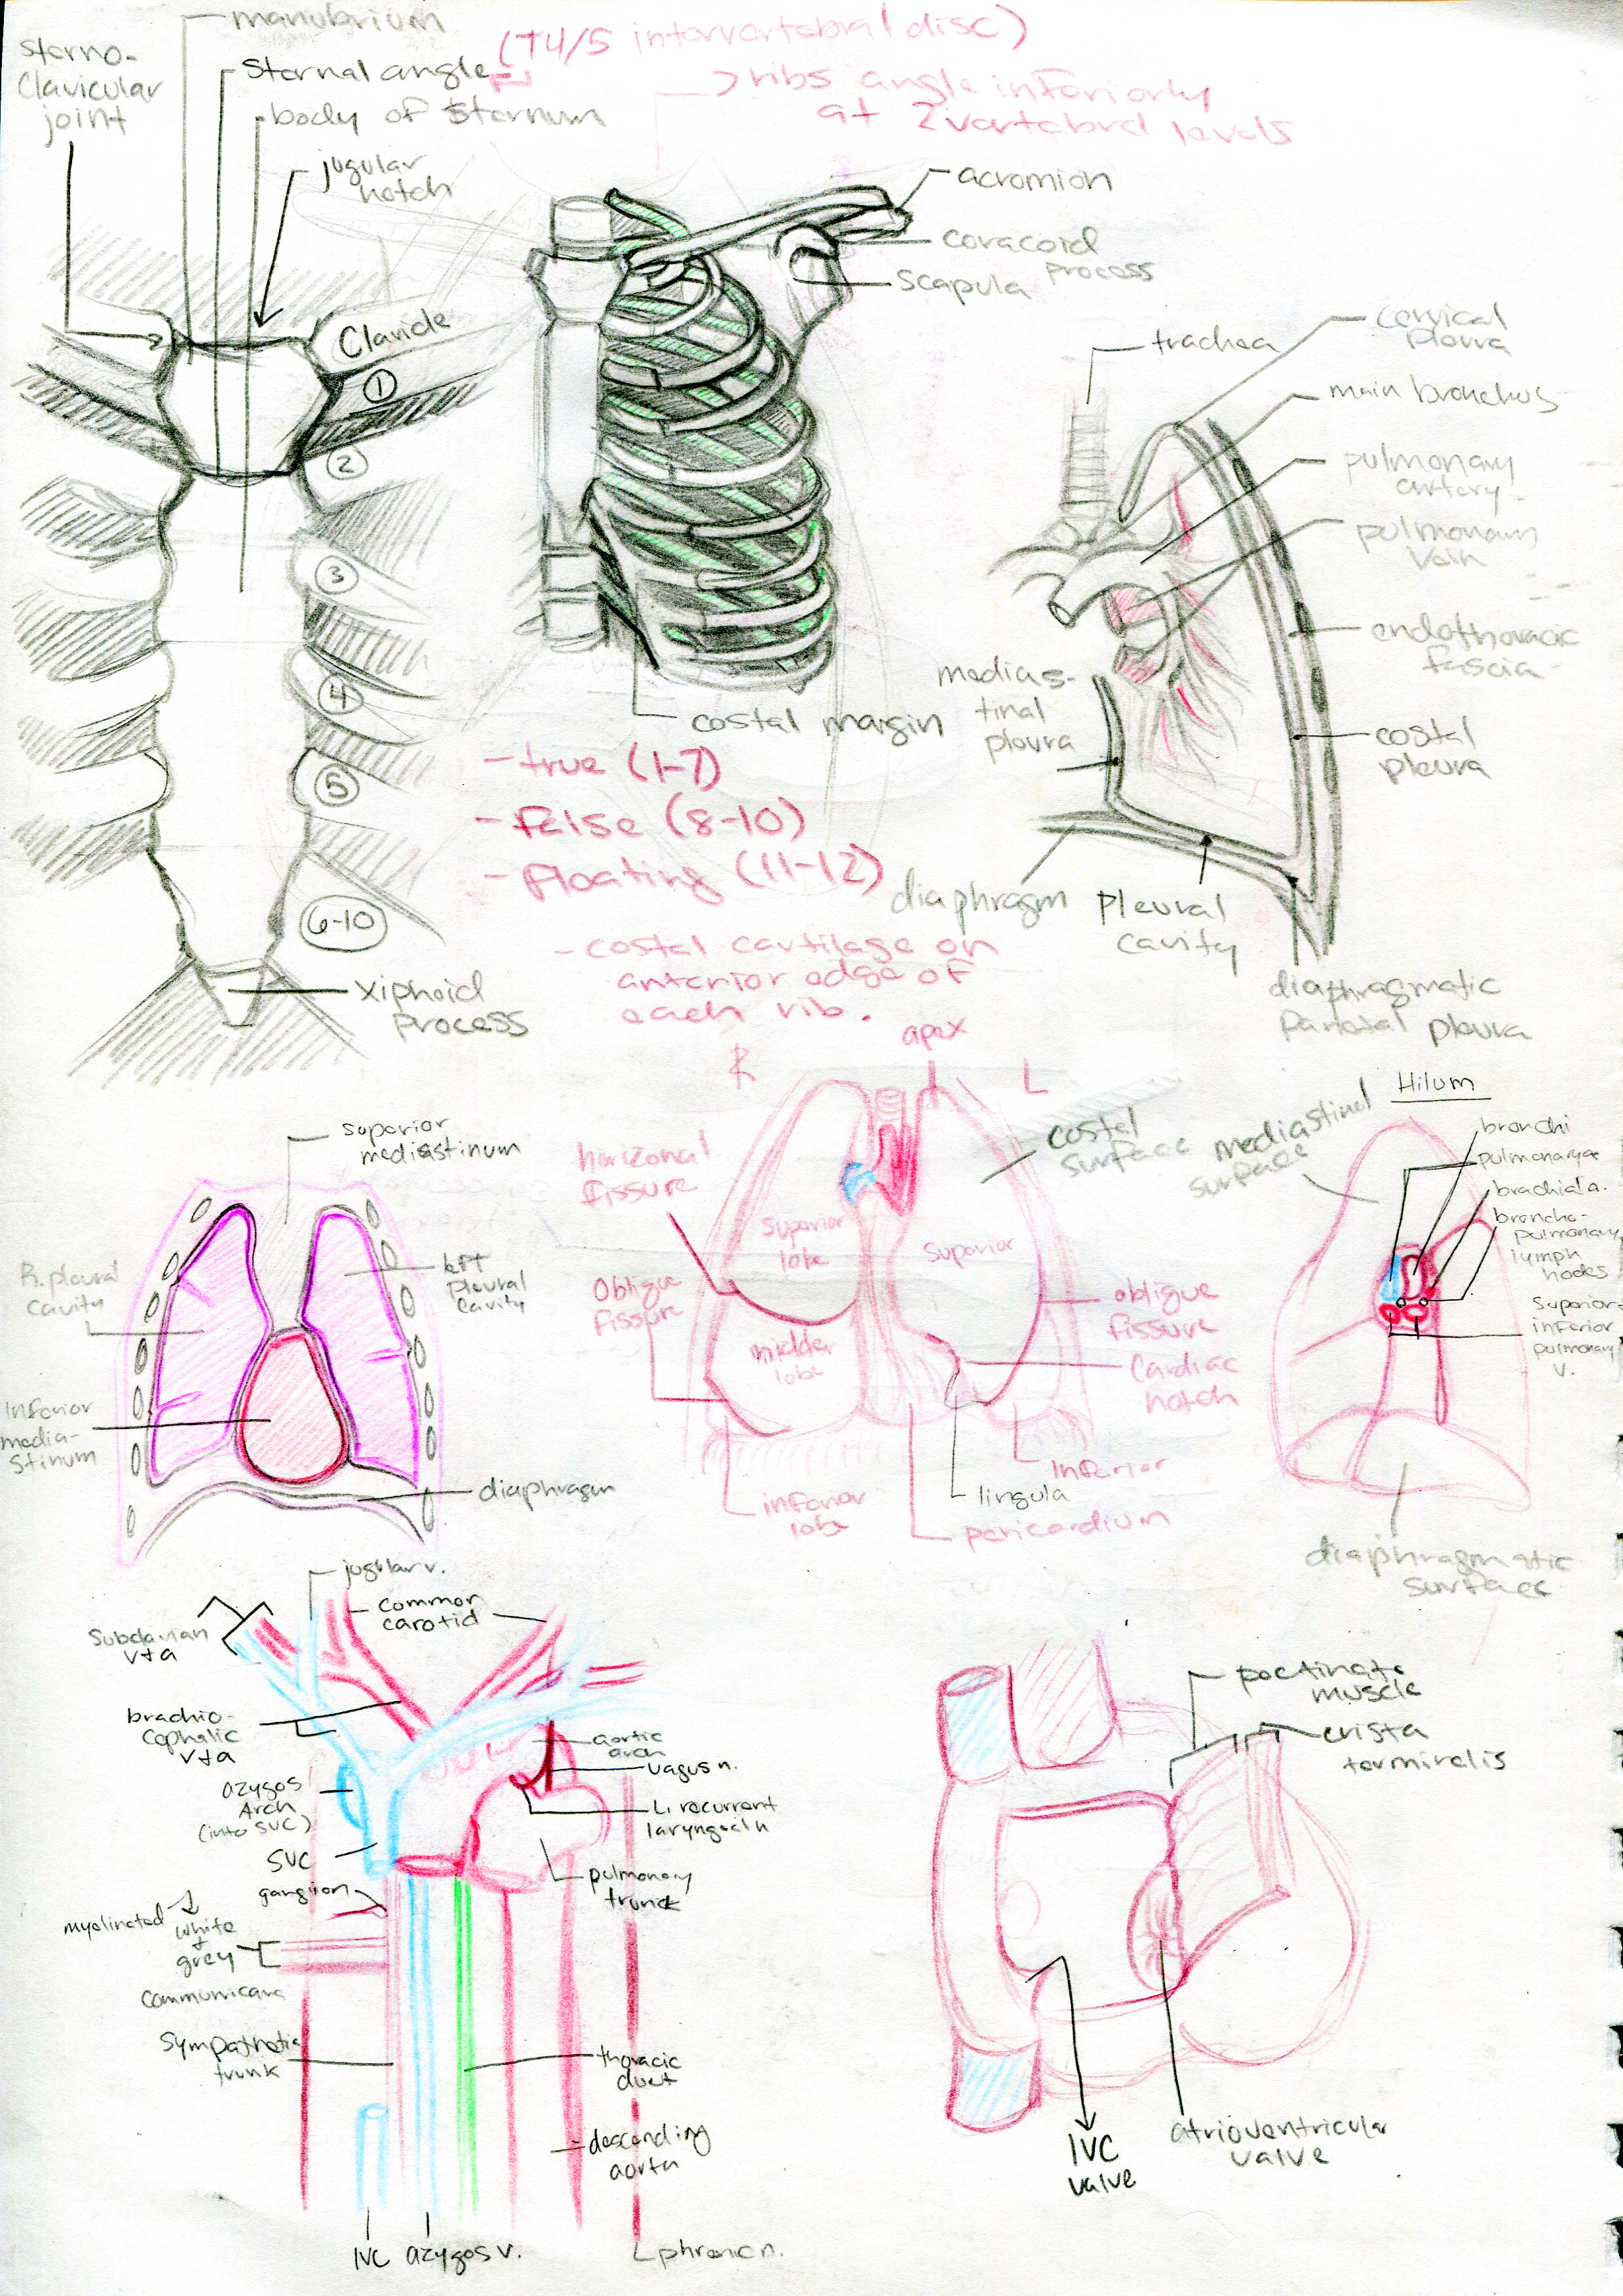 MossE_sketches_Page_1.jpg